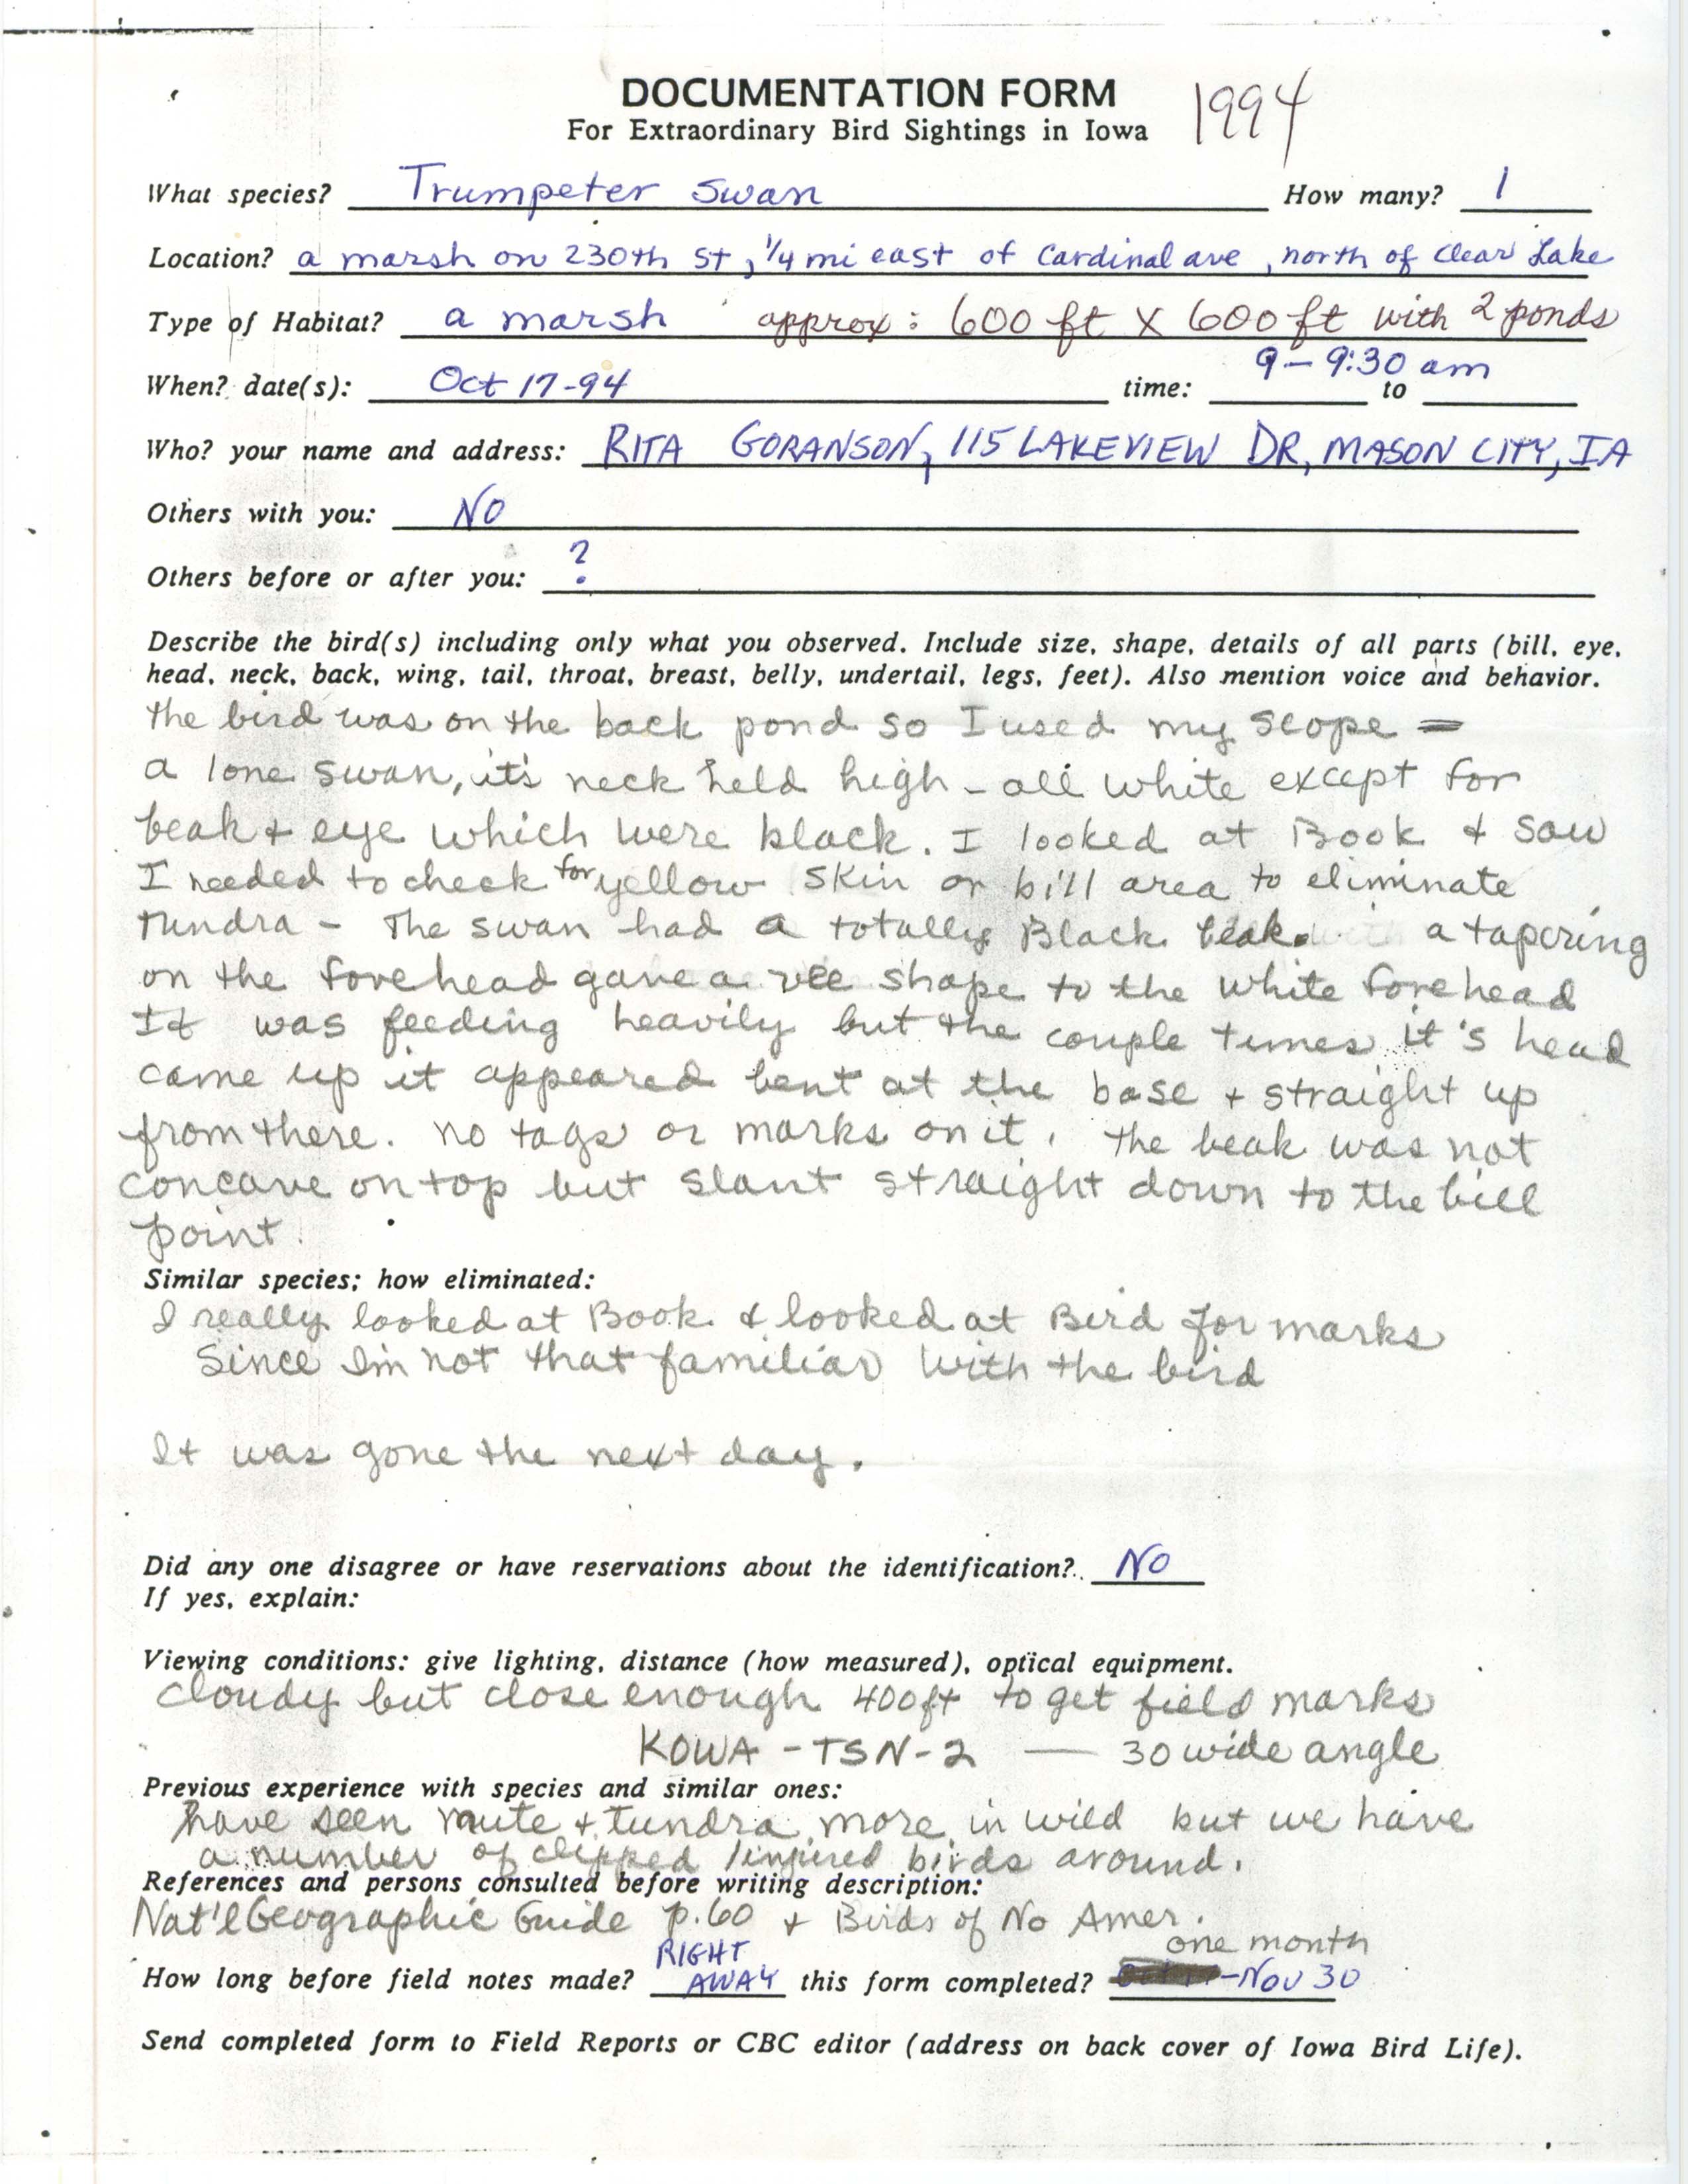 Rare bird documentation form for Trumpeter Swan at Clear Lake, 1994